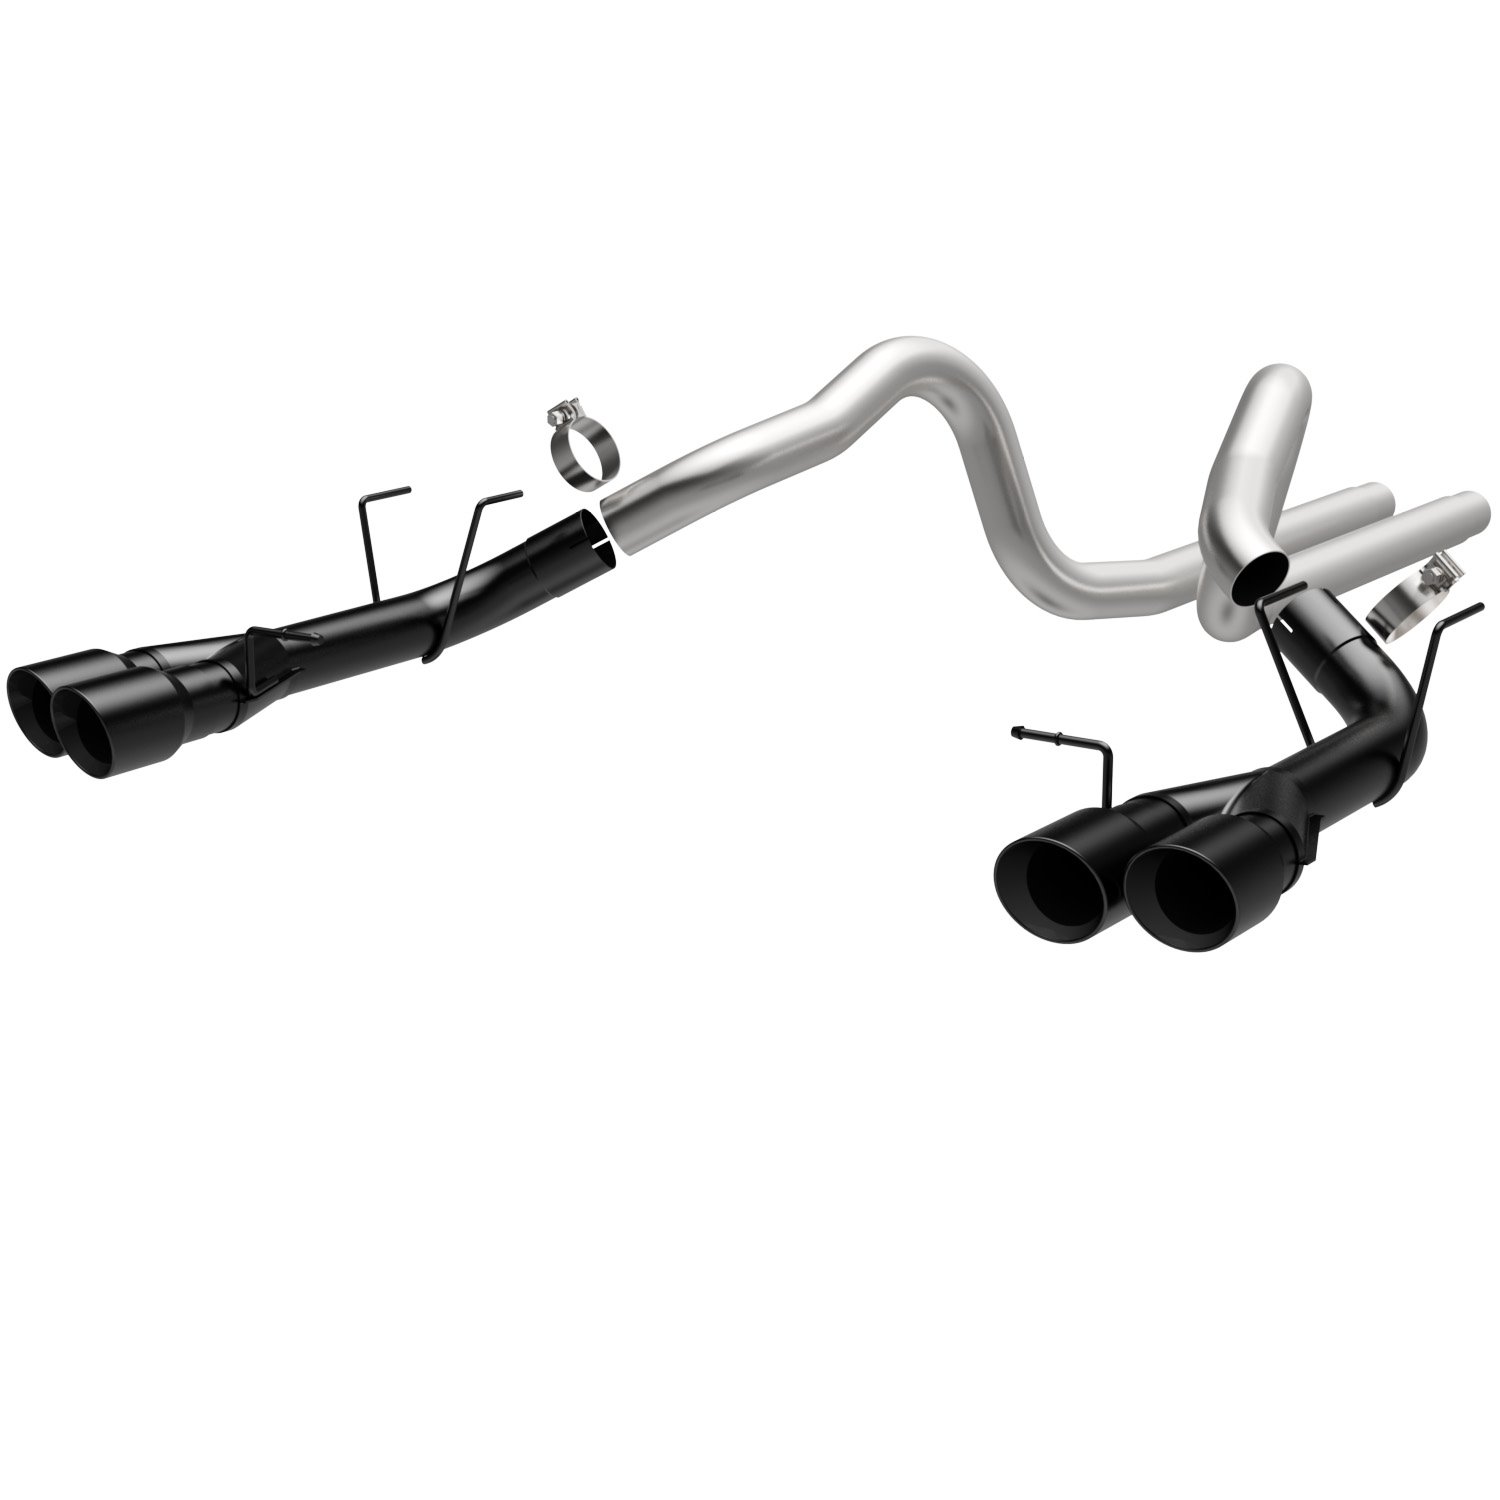 Race Series Cat-Back Exhaust System 2013-2014 Mustang Shelby GT500 5.8L V8